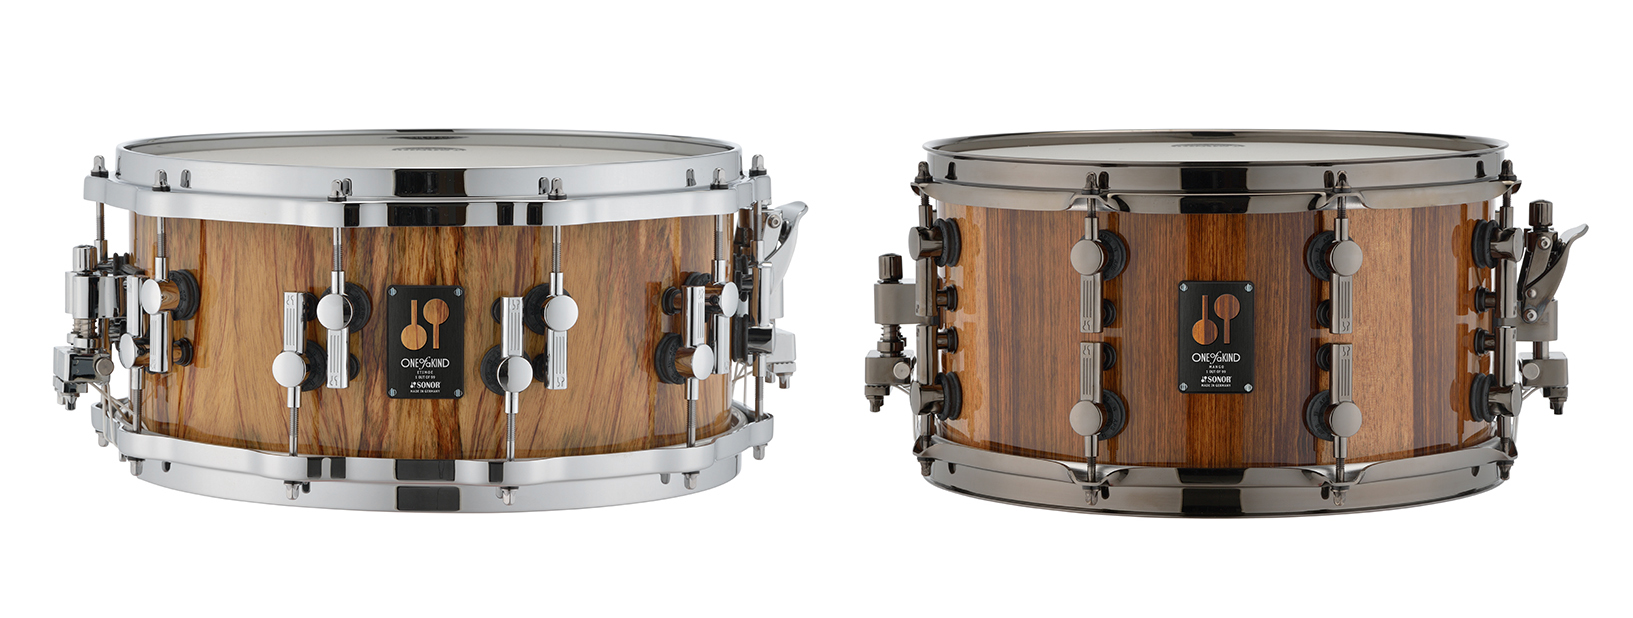 SONOR】その1台のみのスペックで仕上げた“One of A Kind Snare Drum